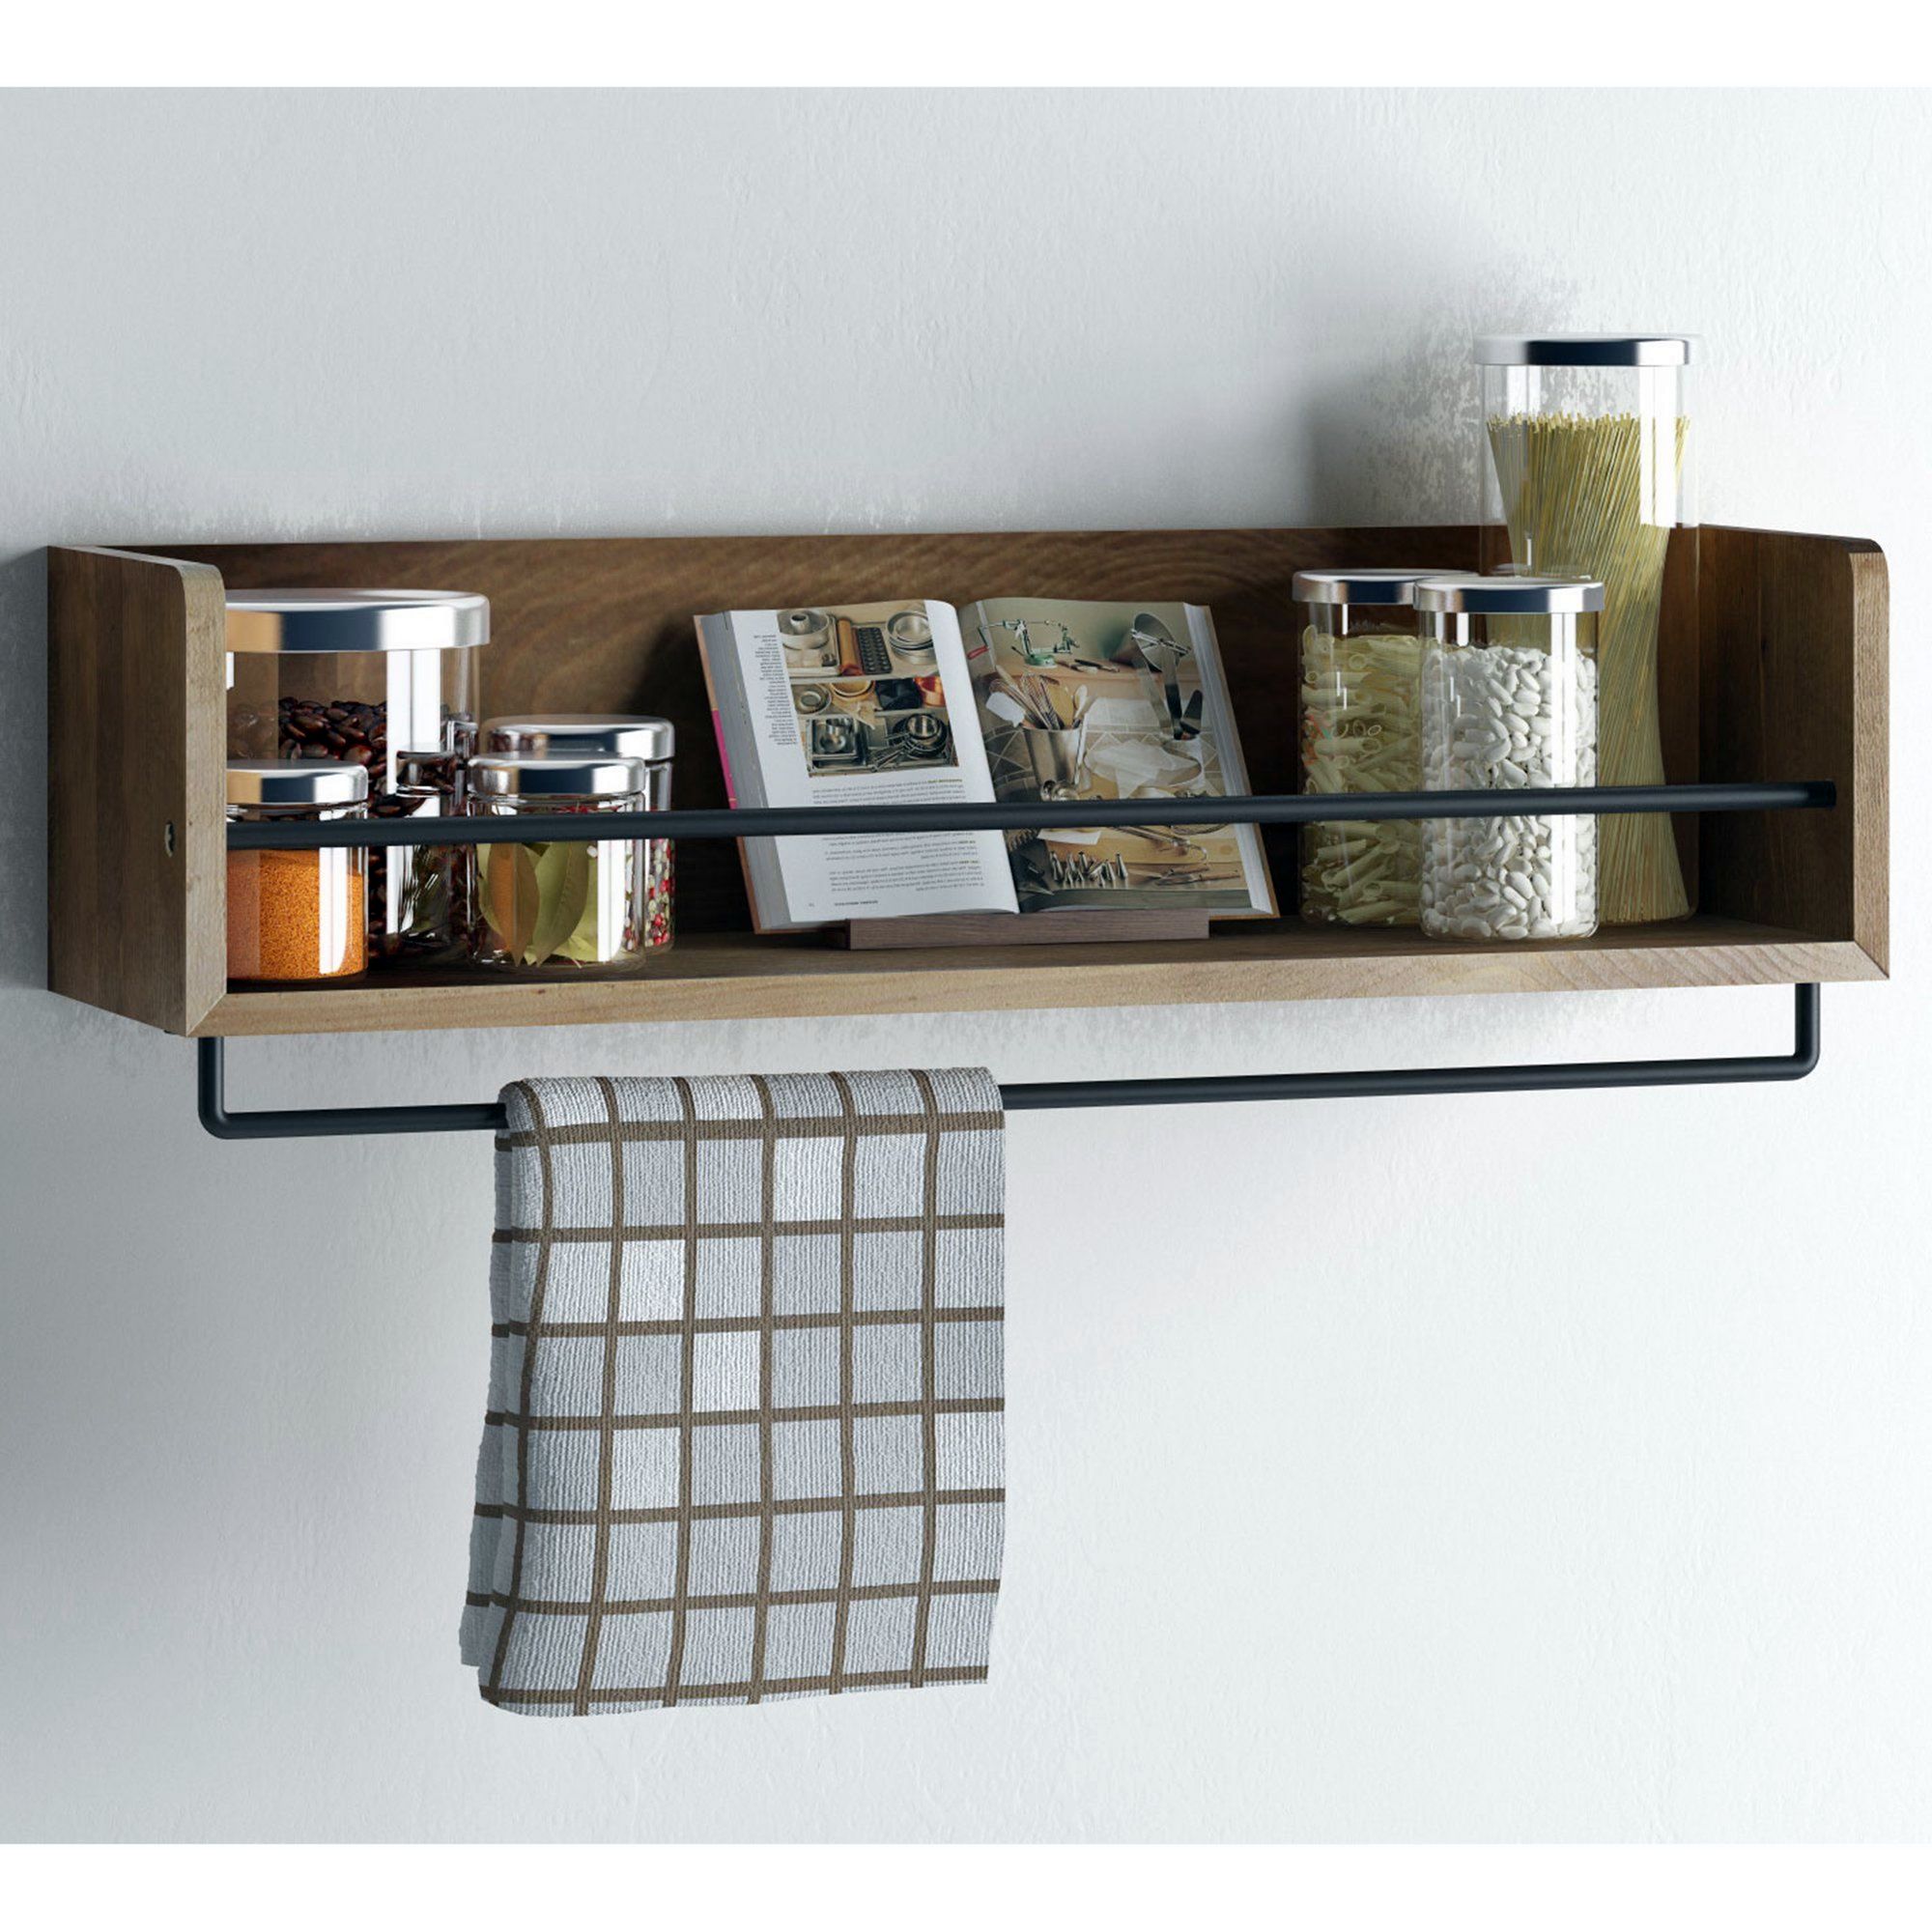 Wood And Wire Multi Kitchen Shelf From Etsy